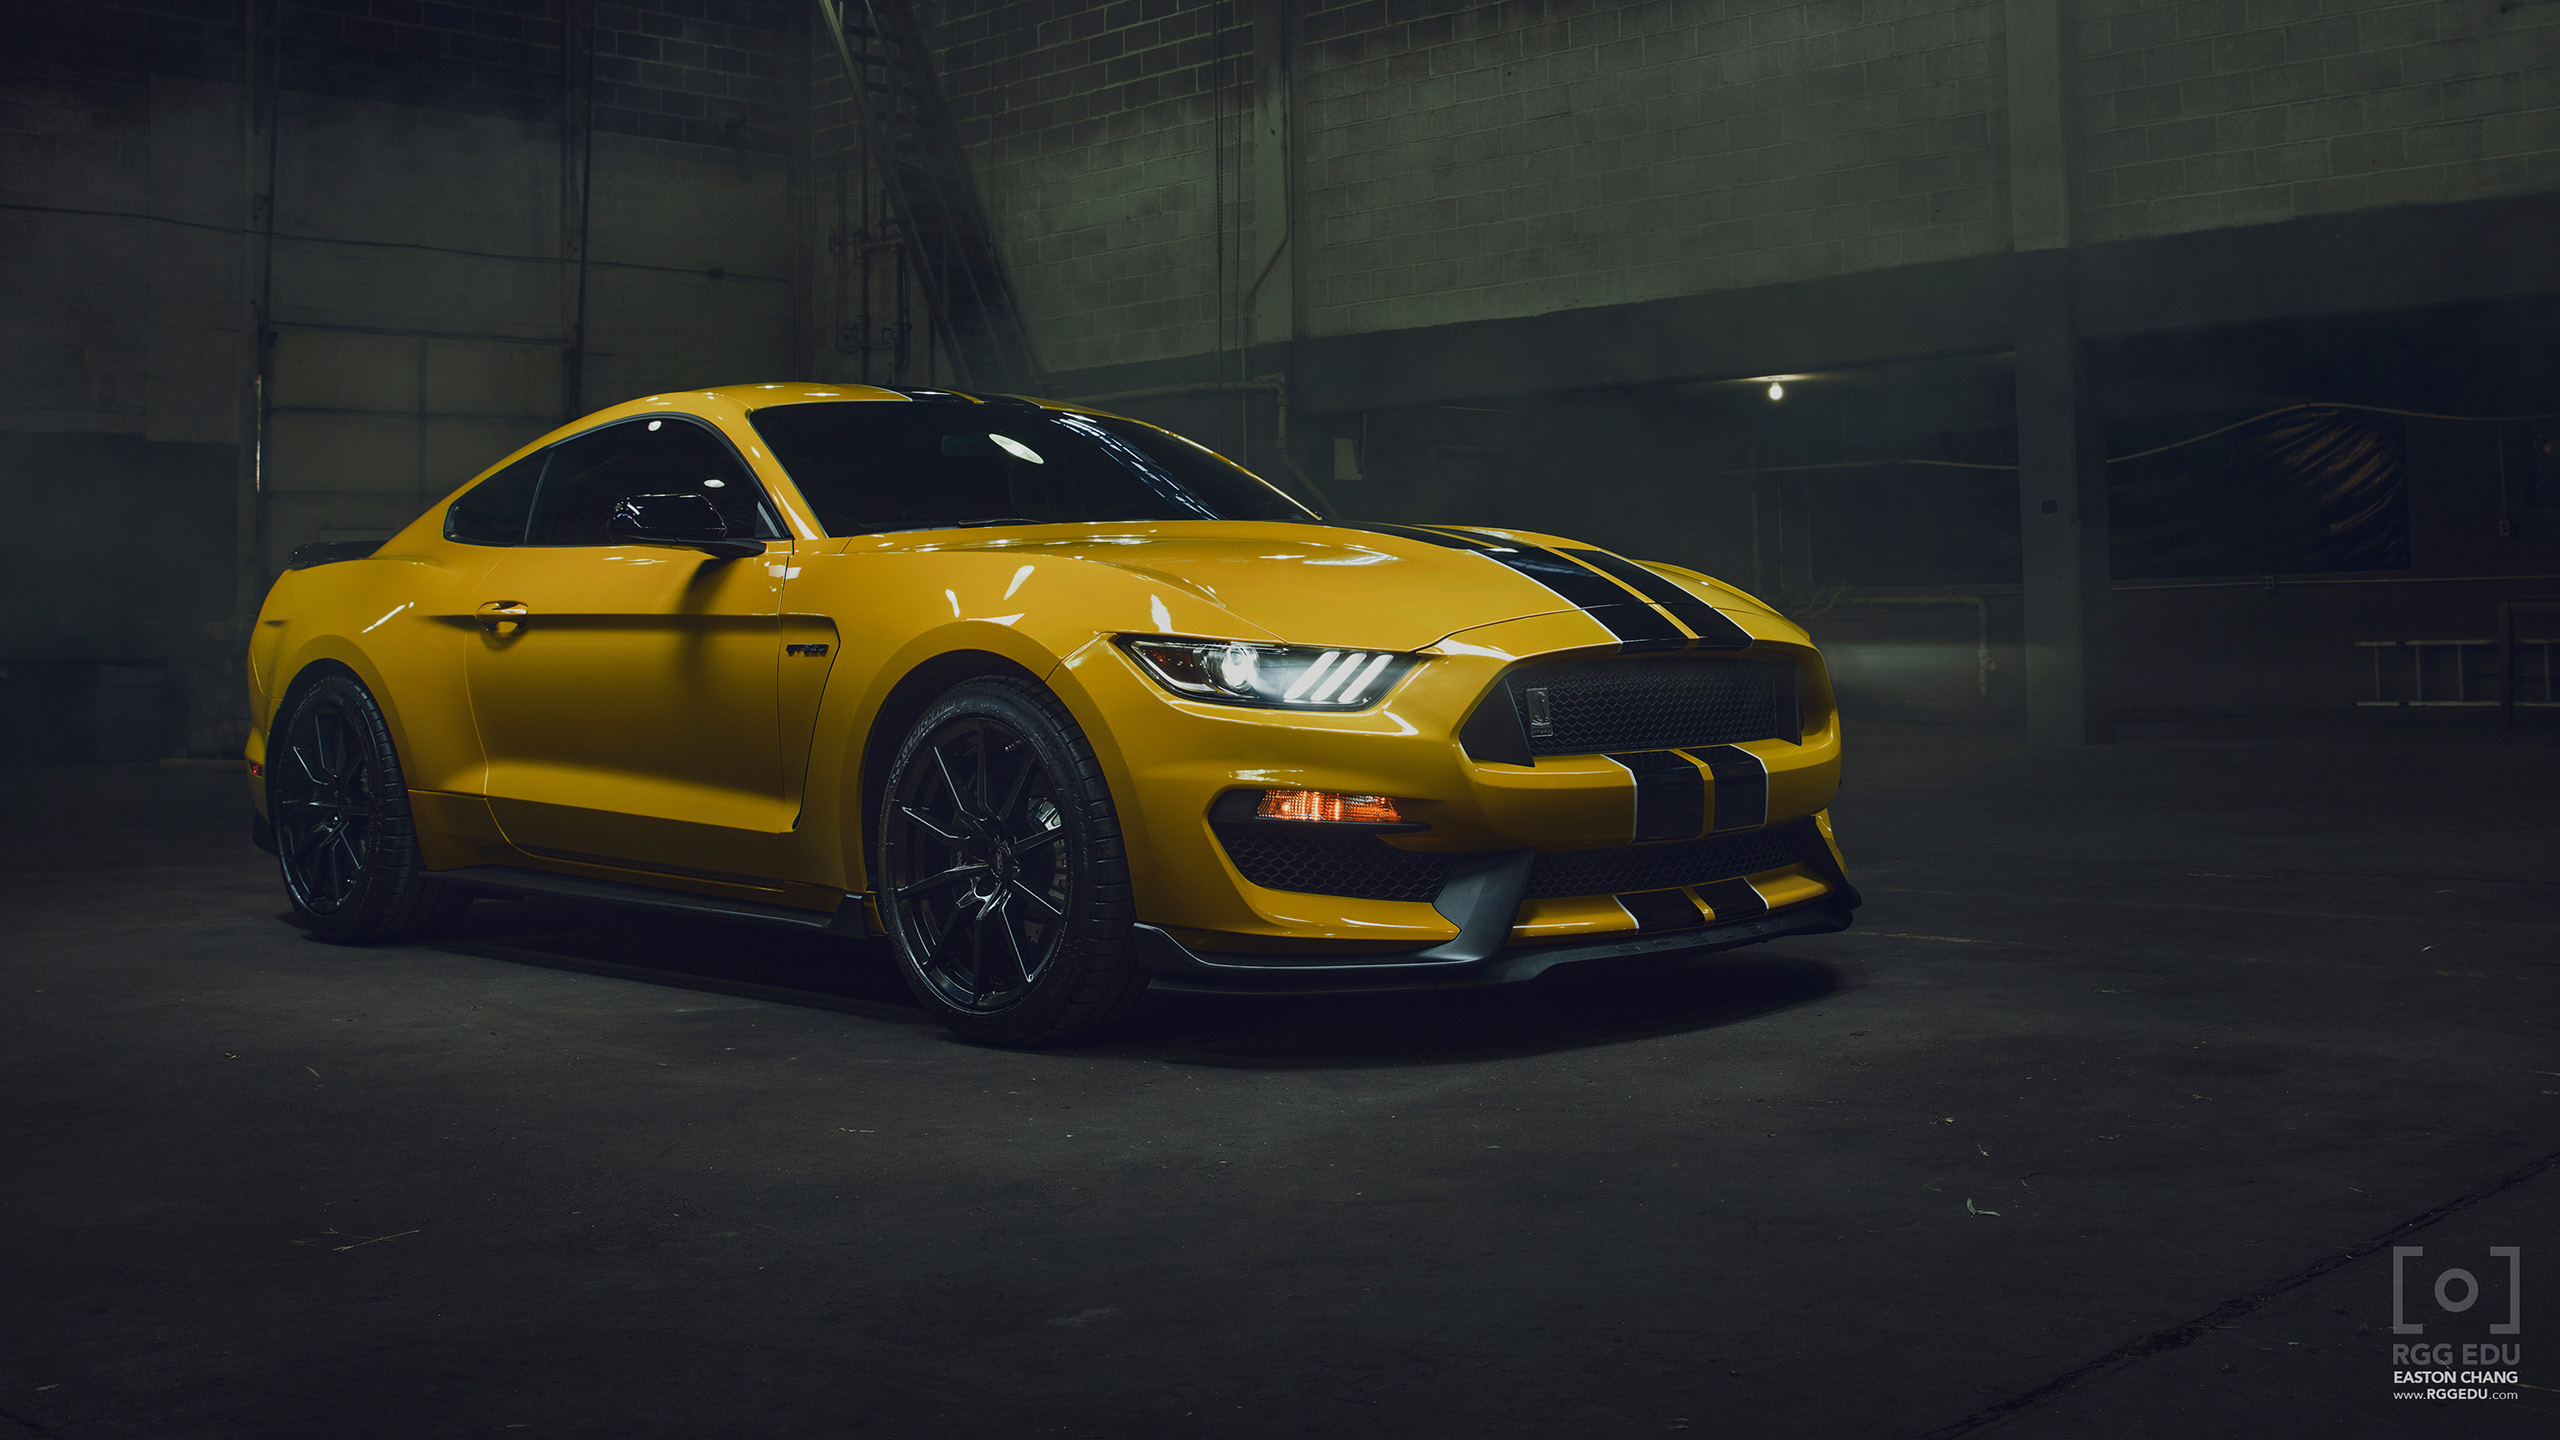 Your Ridiculously Awesome Ford Mustang Shelby Gt350 Wallpaper Is Here